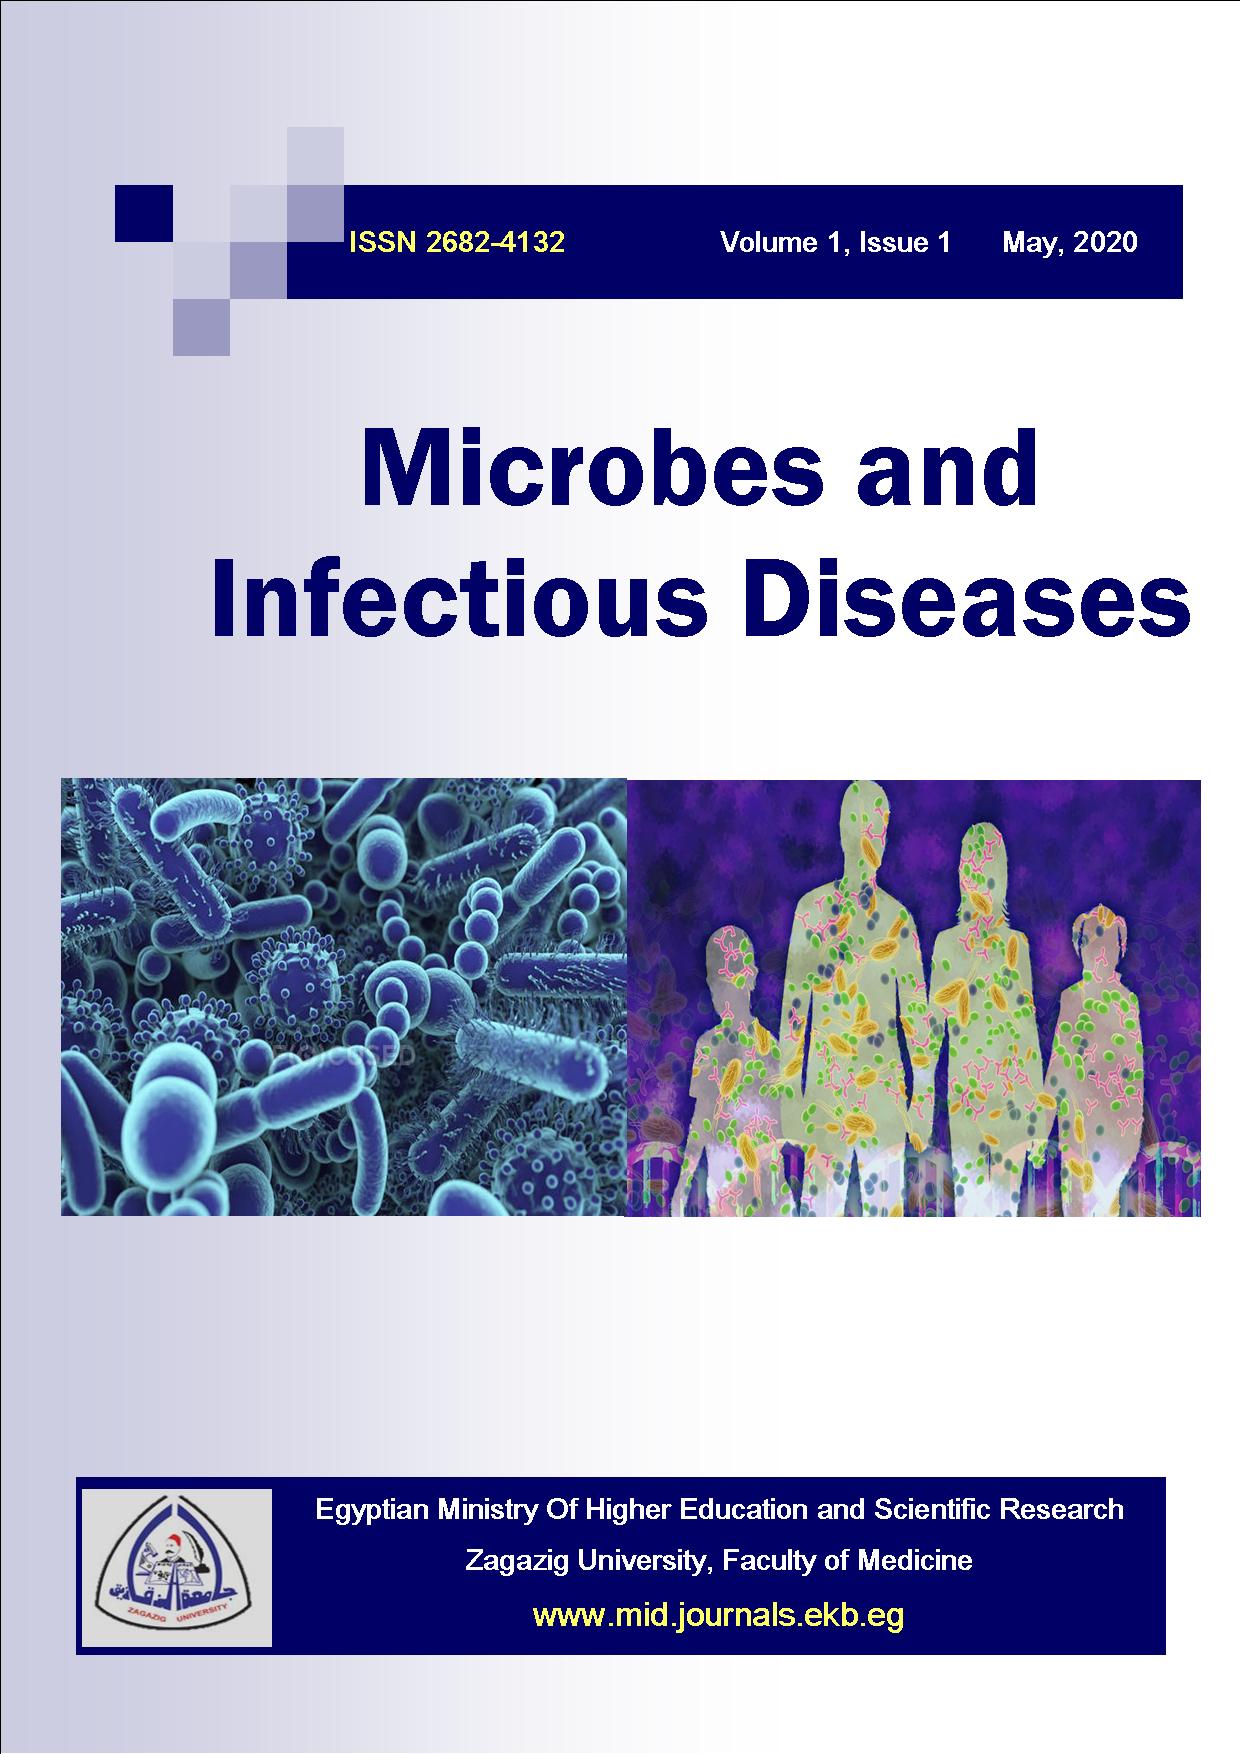 Microbes and Infectious Diseases